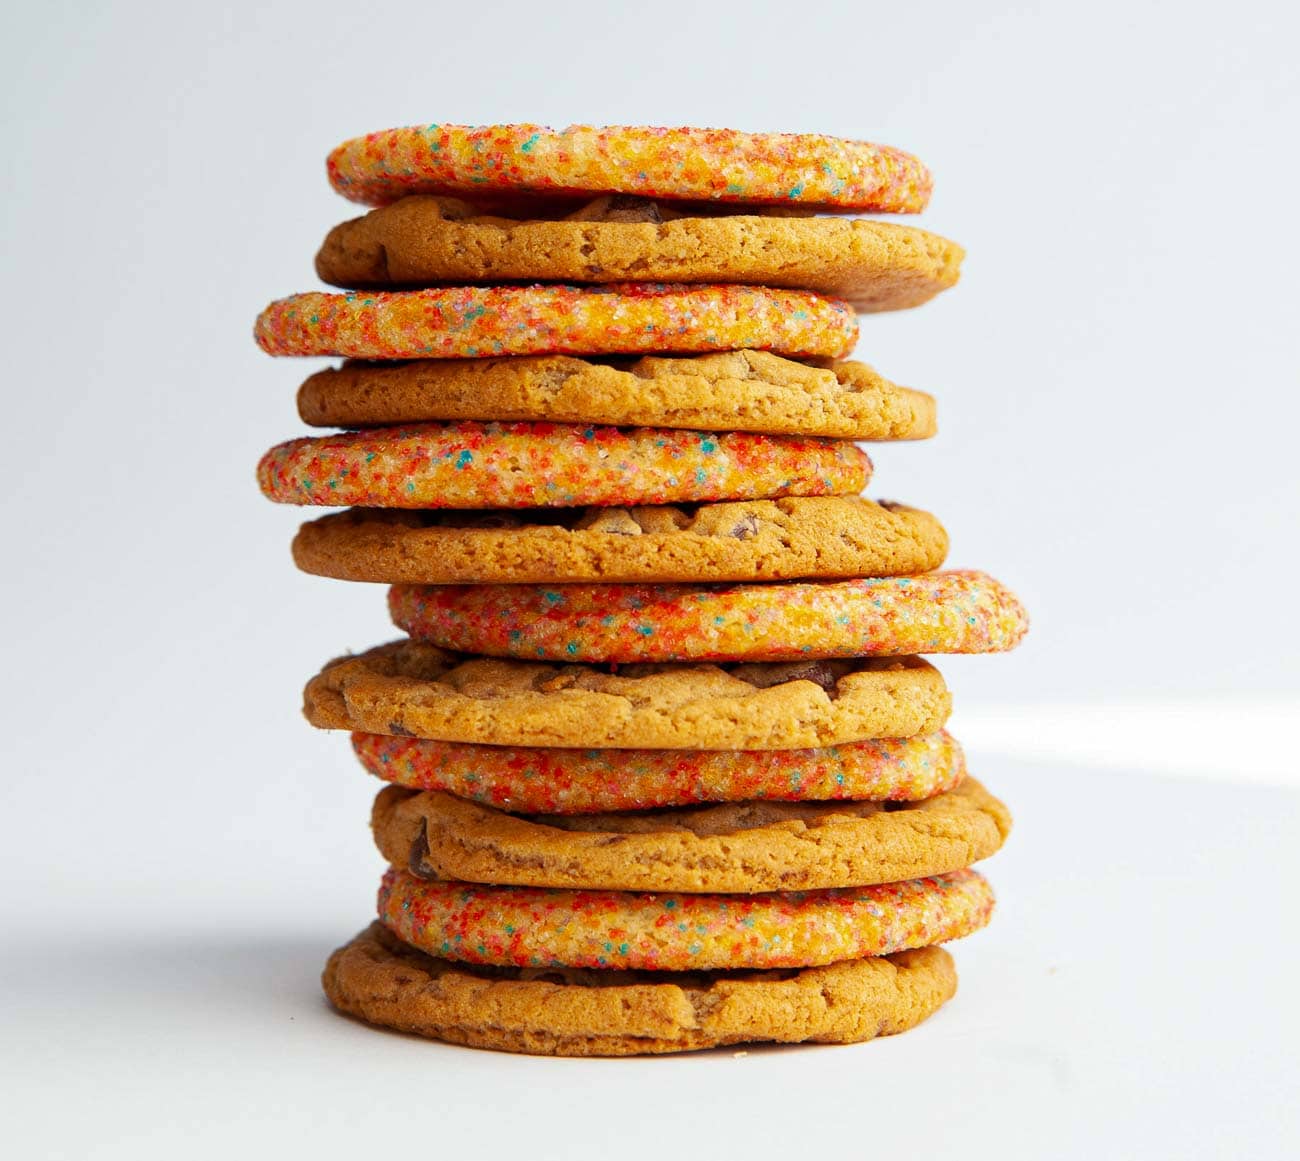 Picture of a dozen Original chocolate chip and Sugar cookies alternately stacked together